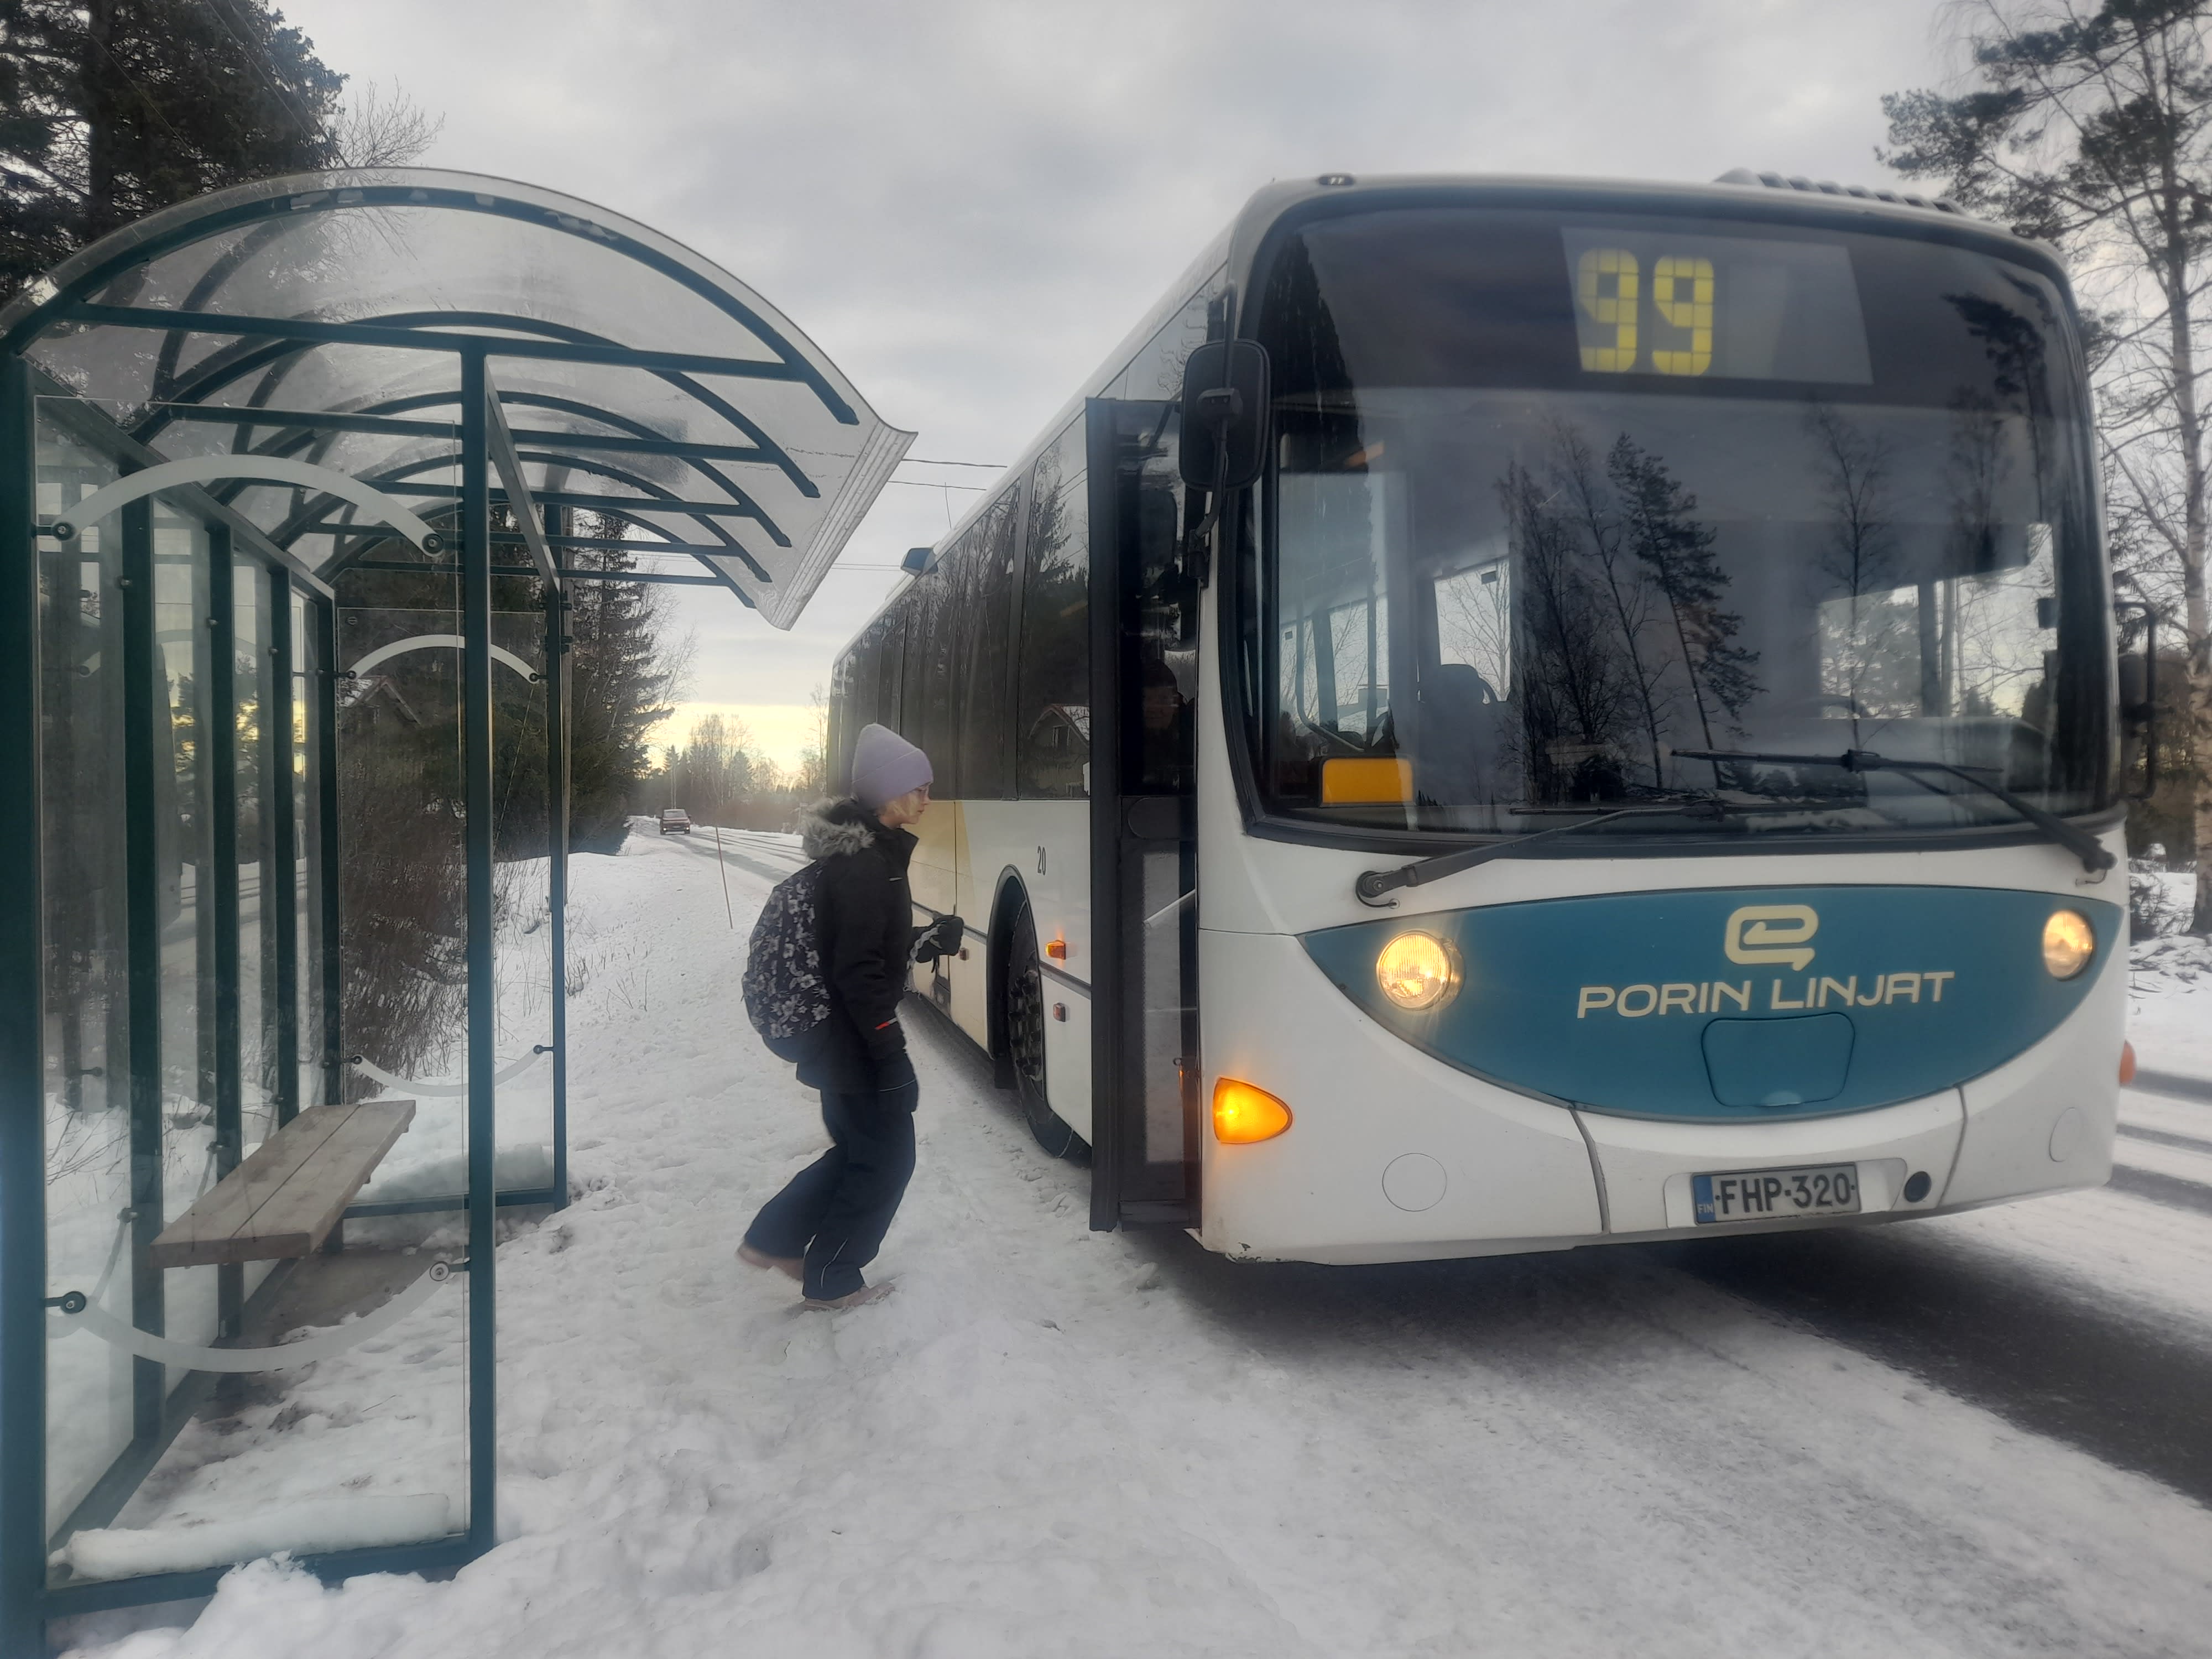 Bus strike: In Pori, some drivers left the union to get back behind the wheel